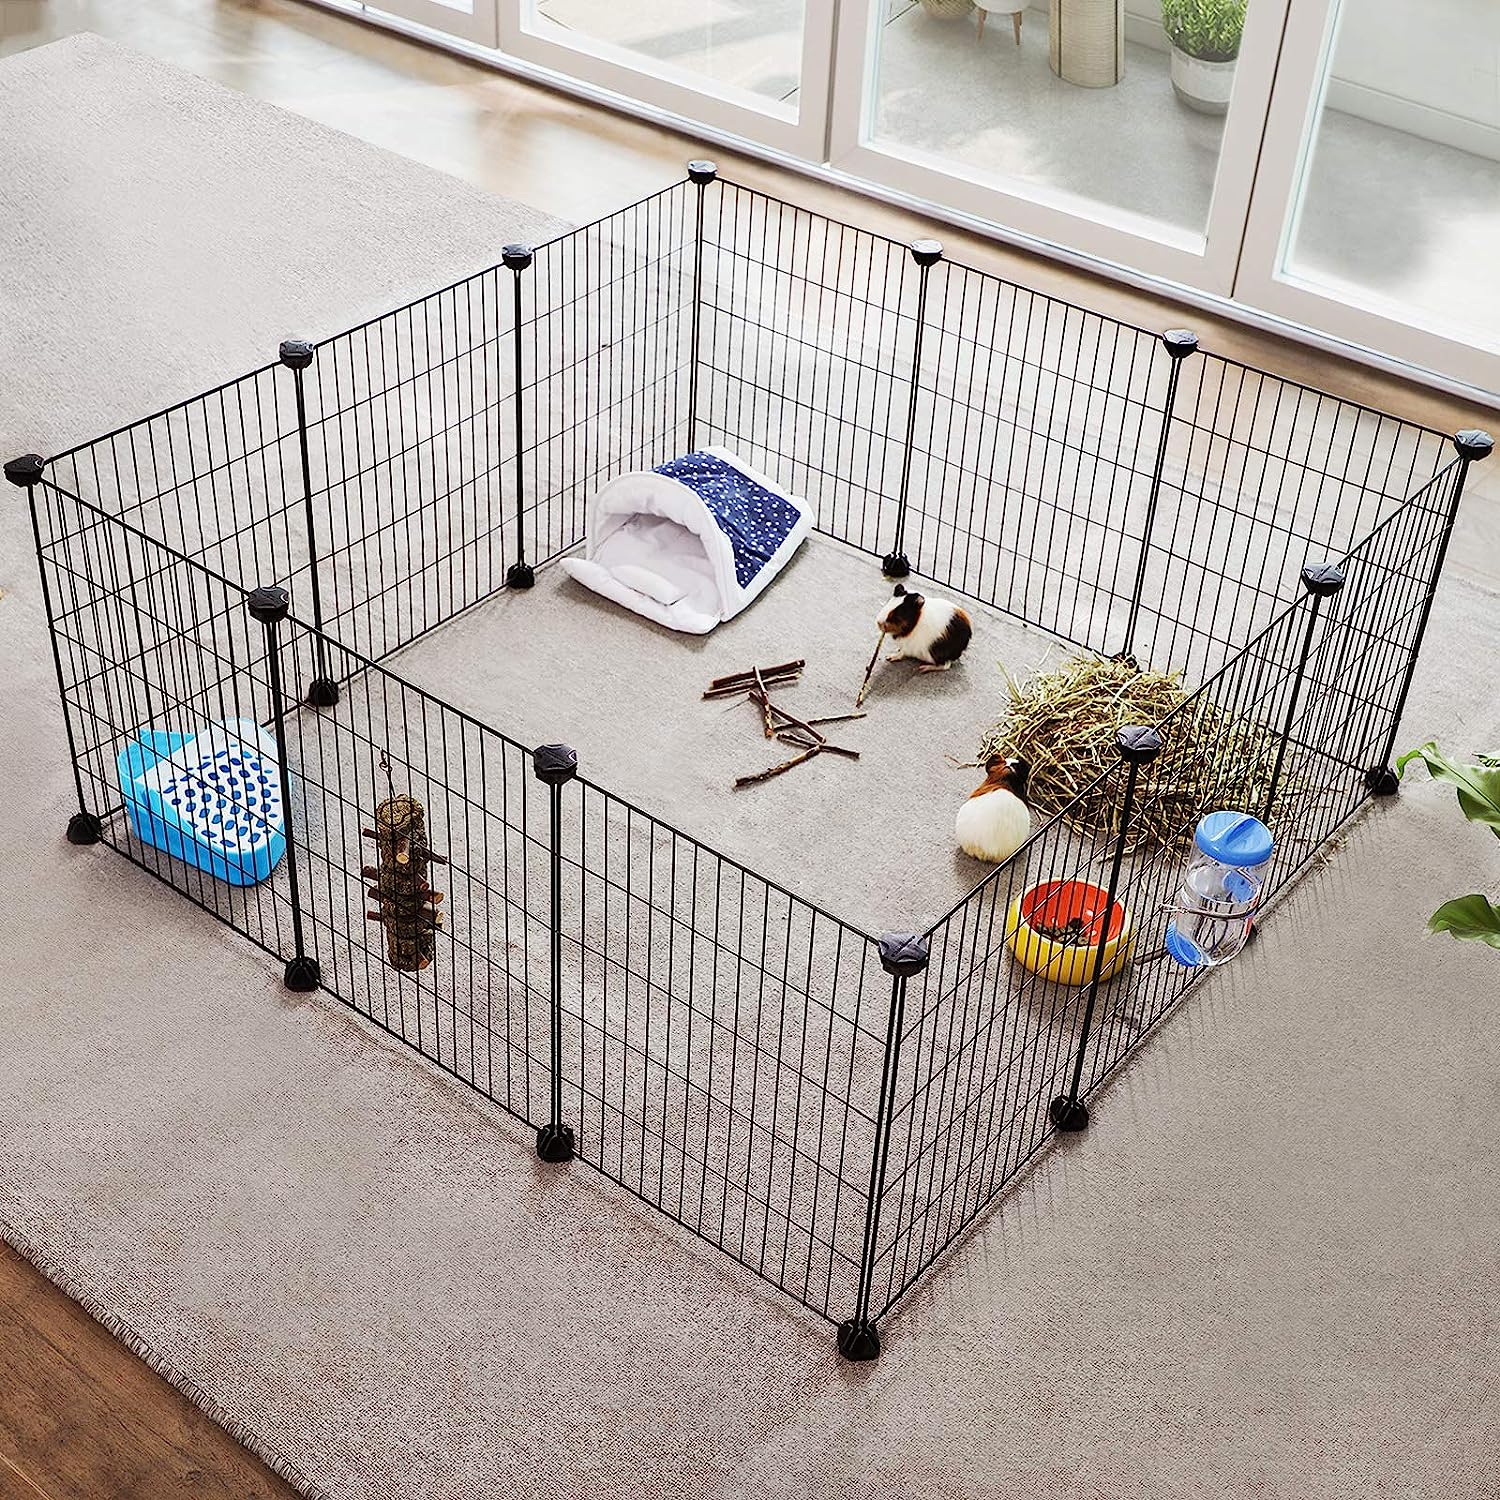 Guinea Pig Playpen, Indoor Rabbit Run Hutch Cage, Large Exercise Enclosure, DIY Metal Modular Fence for Hamster, Pet, Small Animals